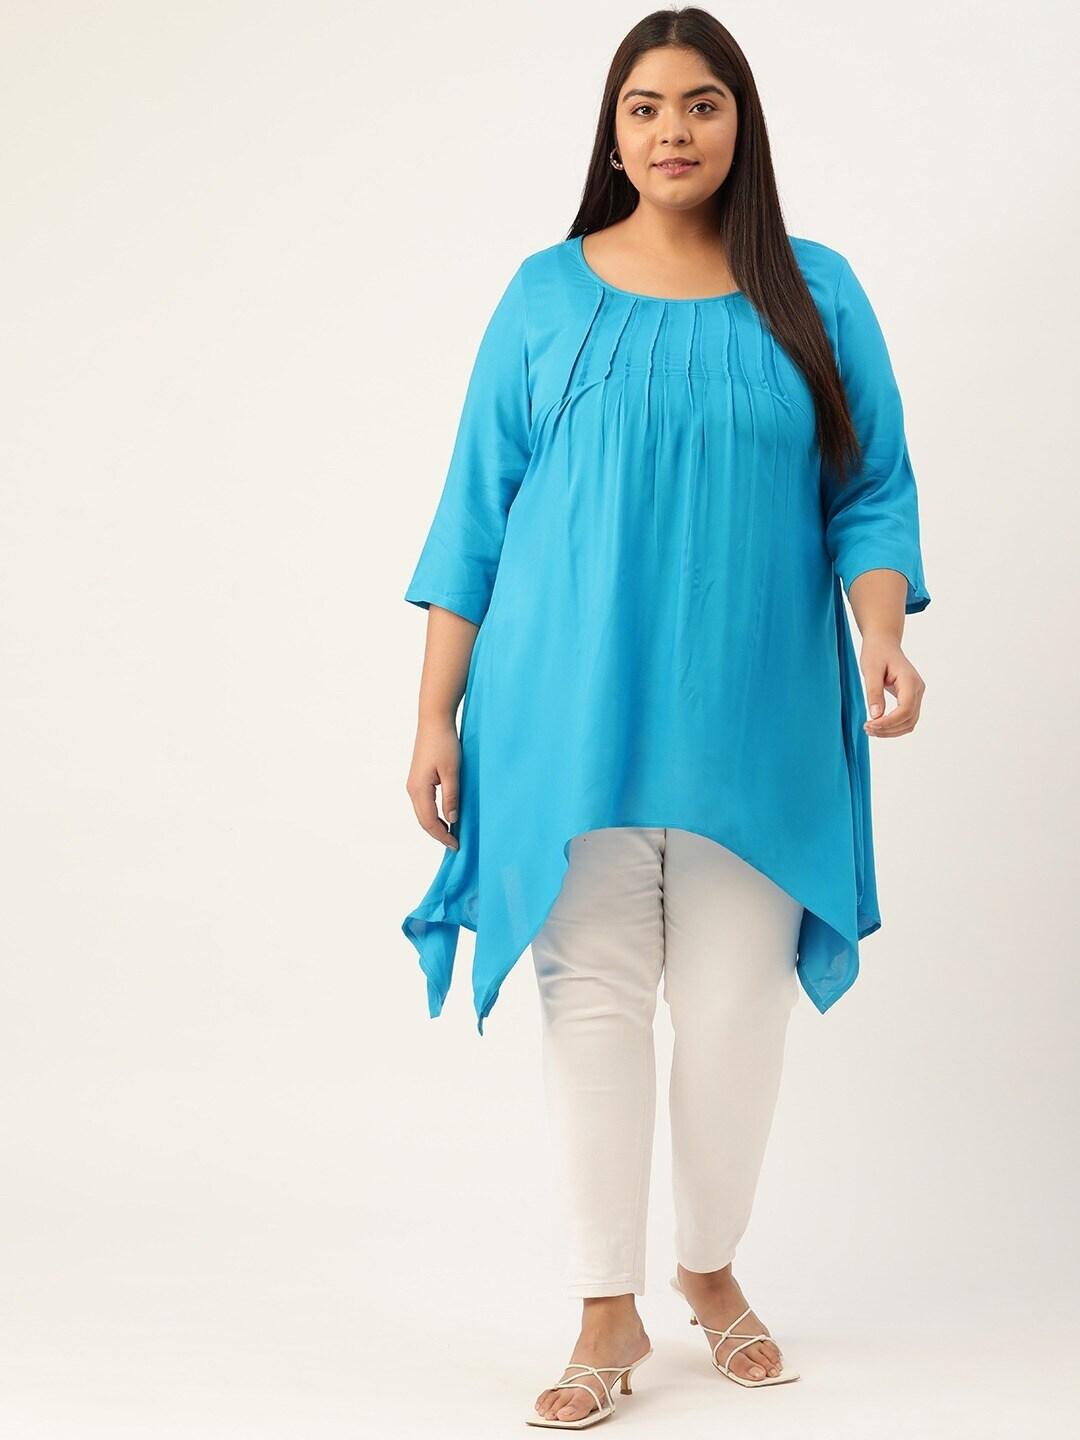 theRebelinme Plus Size Women Teal High-Low Top